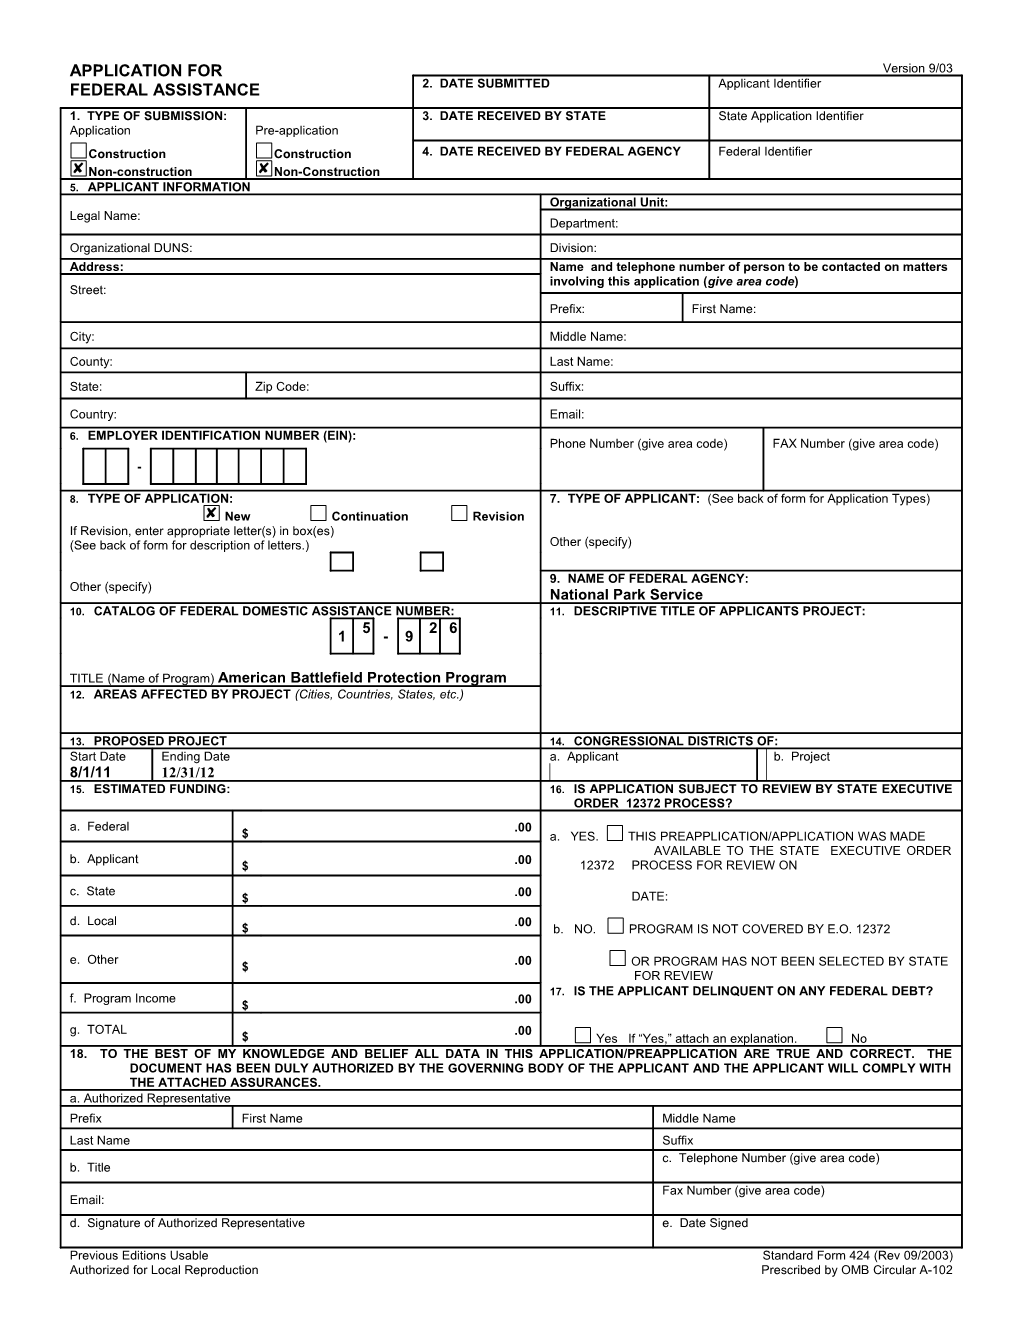 Application for Federal Assistance